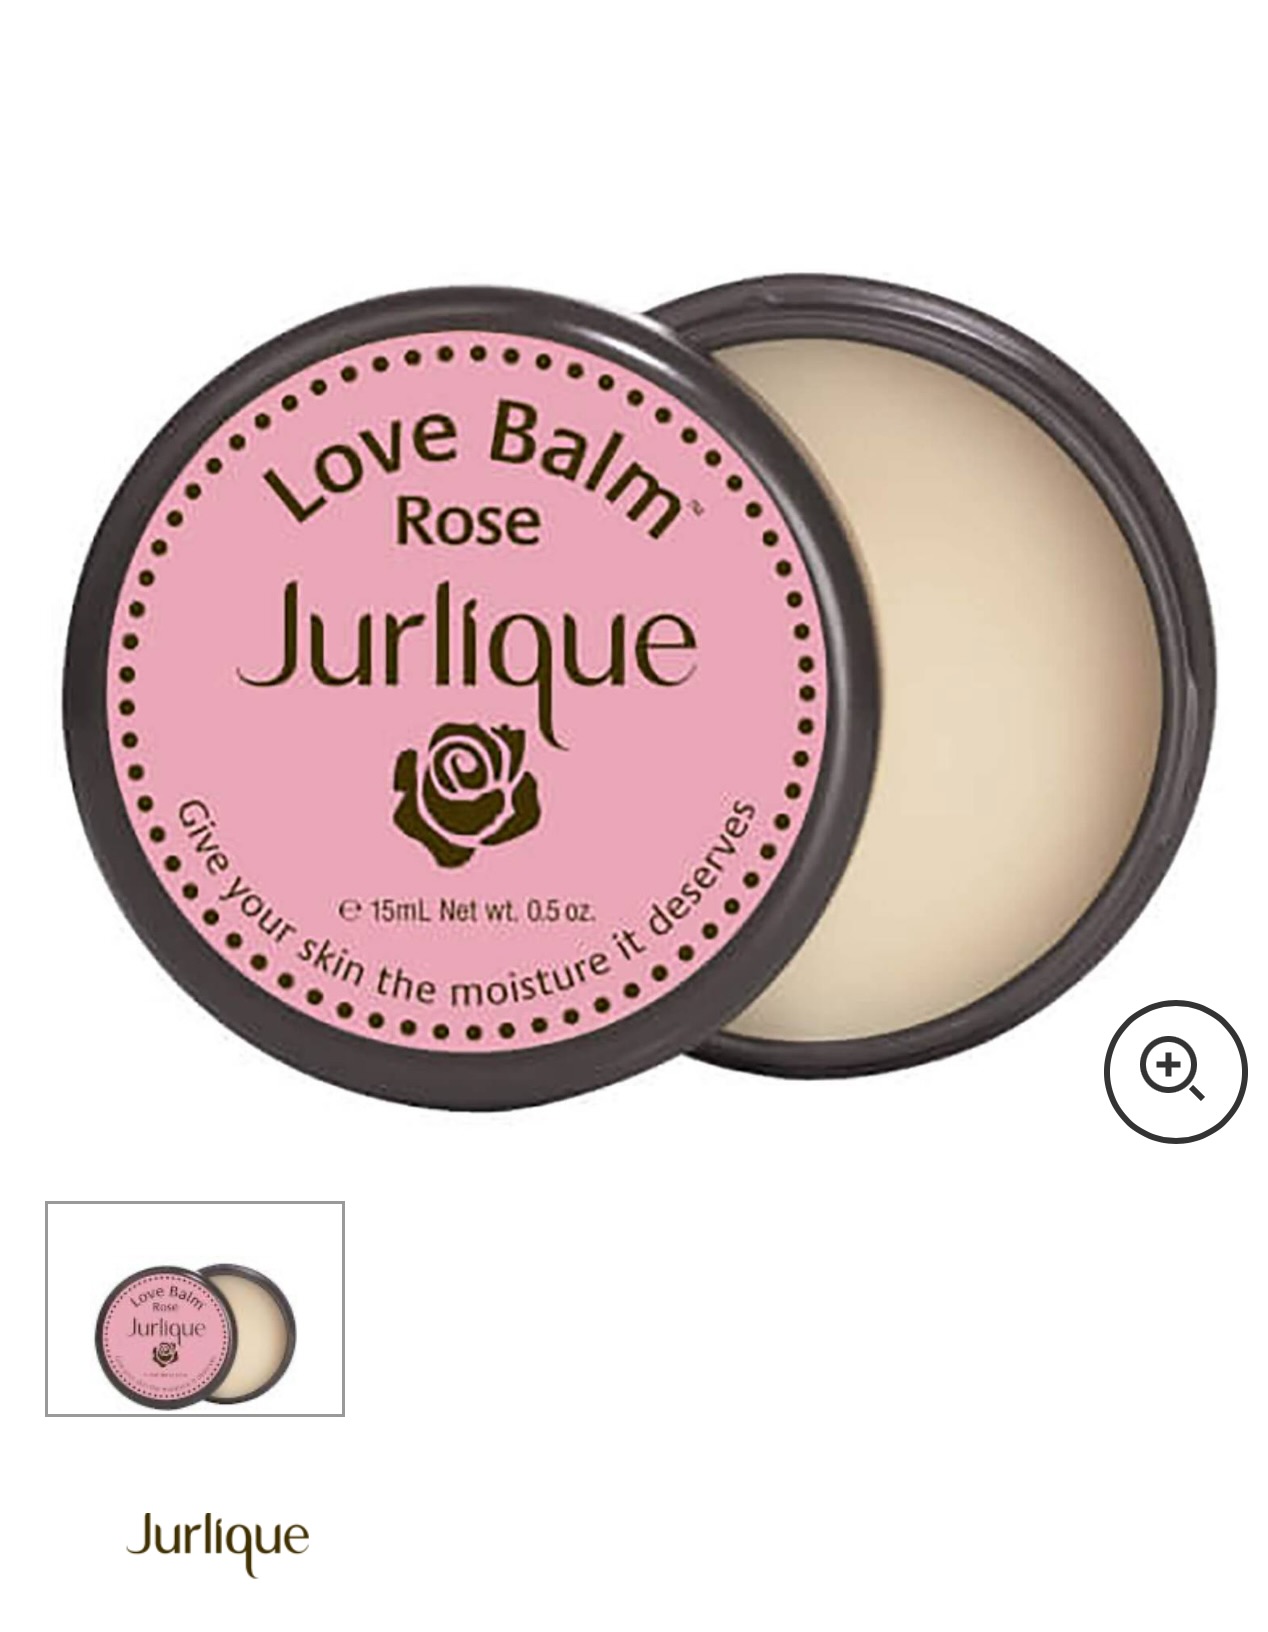 holiday gift - Jurlique rose balm on More Than Turquoise blog